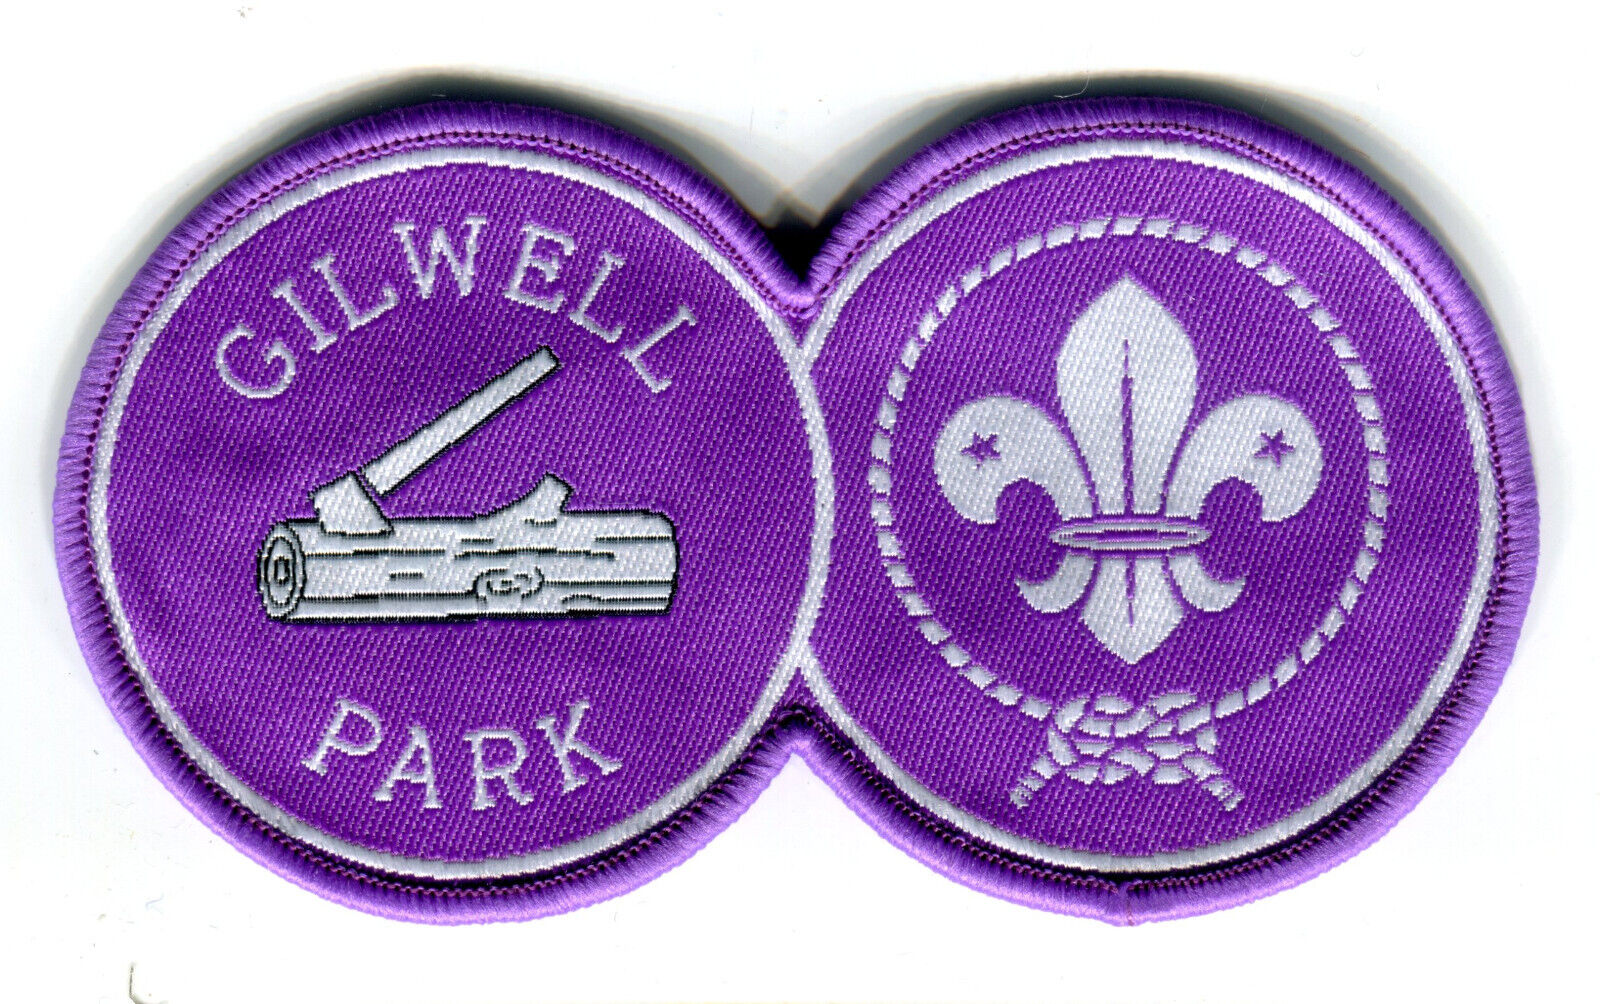 Gilwell Park / Woodbadge Patch - very limited quanties from the UK